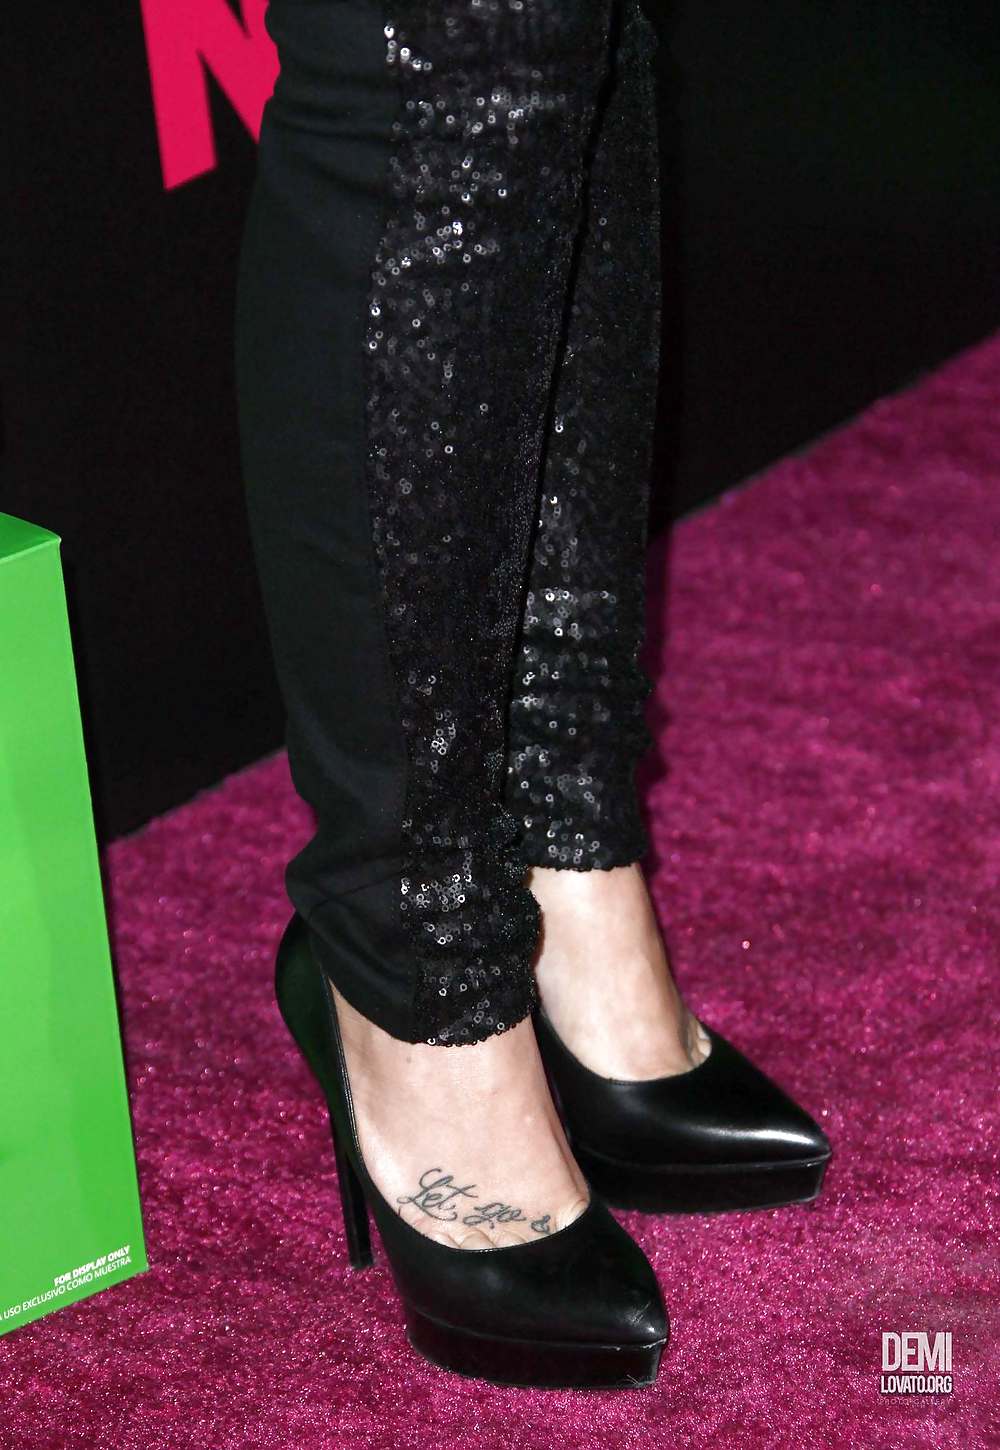 I Want To Cum To Demi Lovato's Hot Feet! #36178741